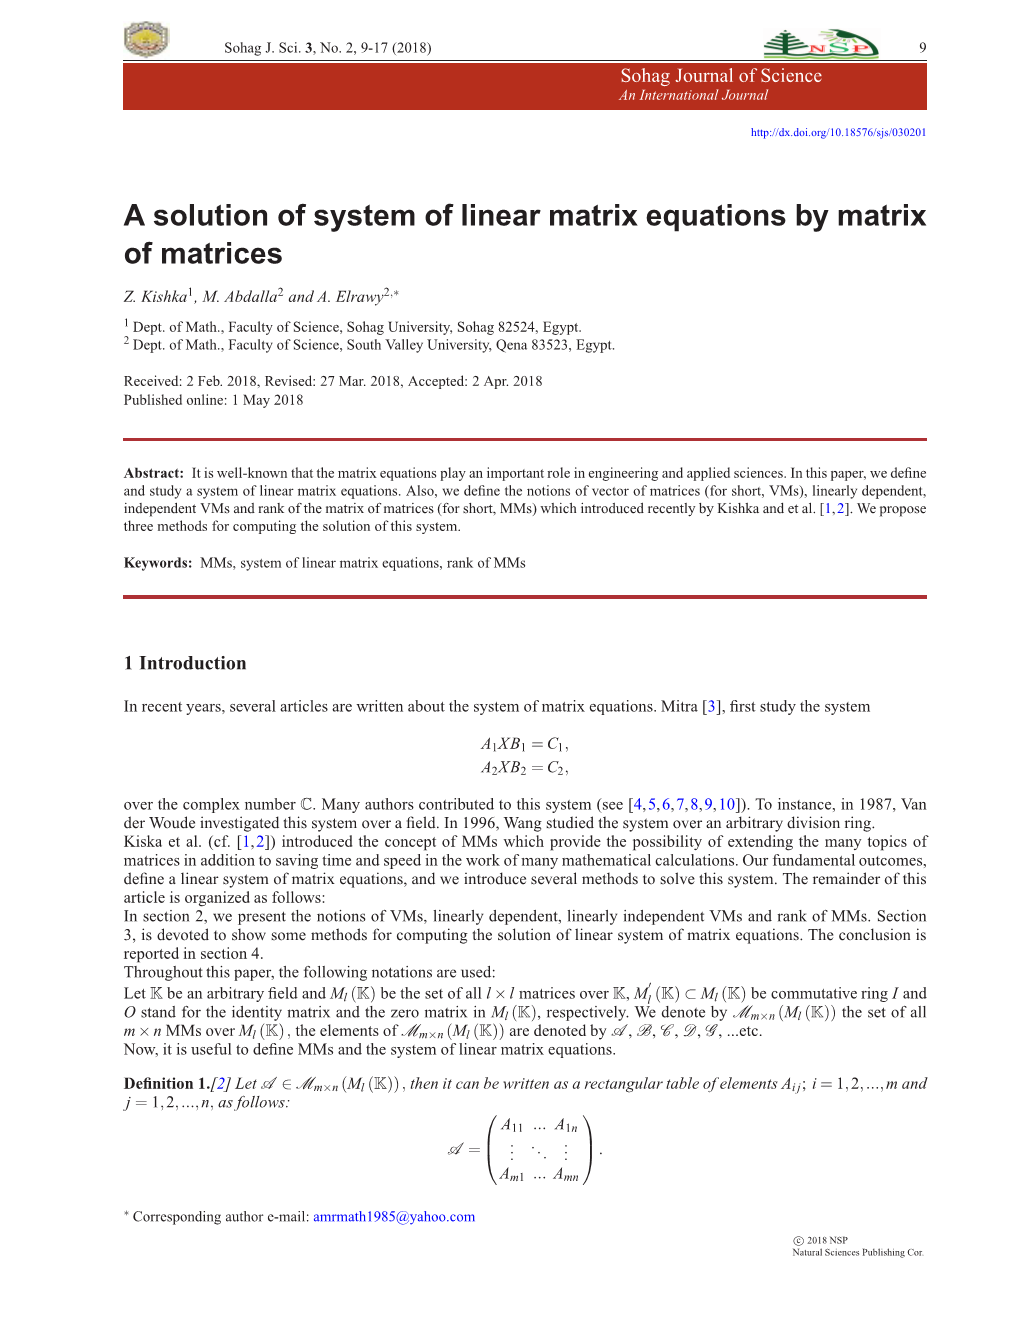 A Solution of System of Linear Matrix Equations by Matrix of Matrices